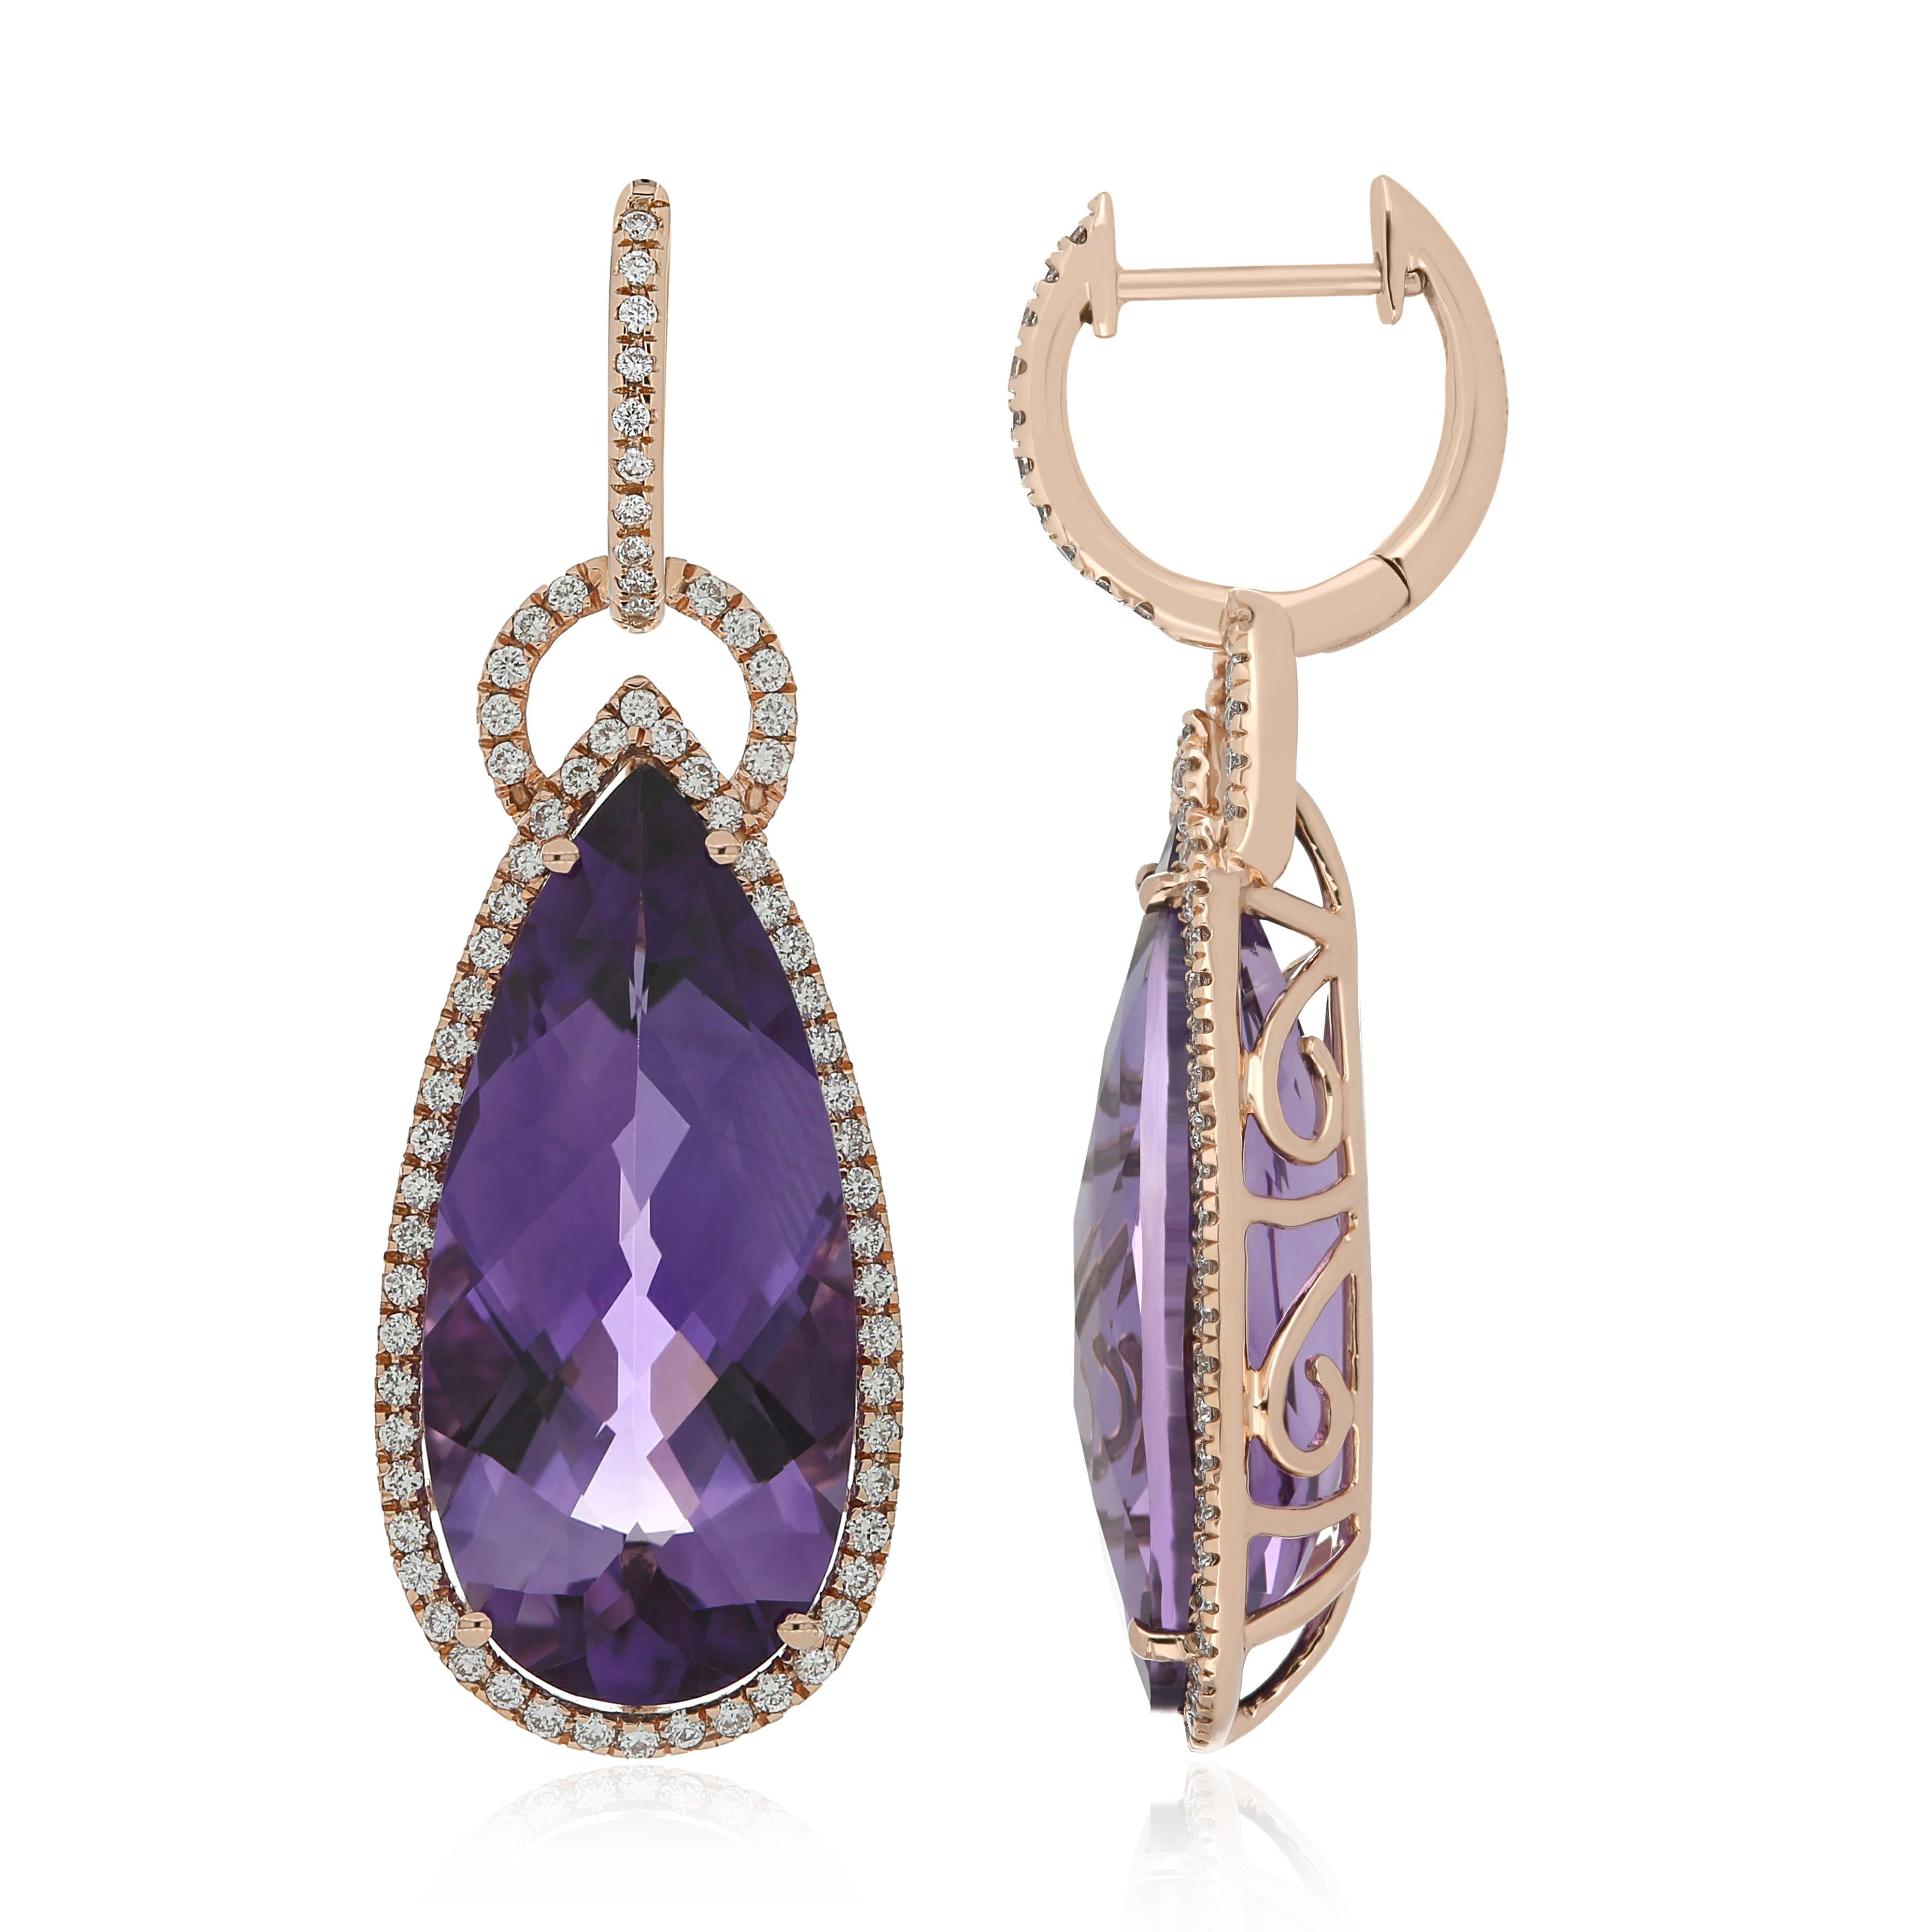 Elegant and exquisitely detailed 14 Karat Rose Gold Earring, center set with 15.74Cts .Pear Shape Amethyst, and micro pave set Diamonds, weighing approx. 0.6Cts Beautifully Hand crafted in 14 Karat Rose Gold.

Stone Detail:
Amethyst: 22x10MM

Stone